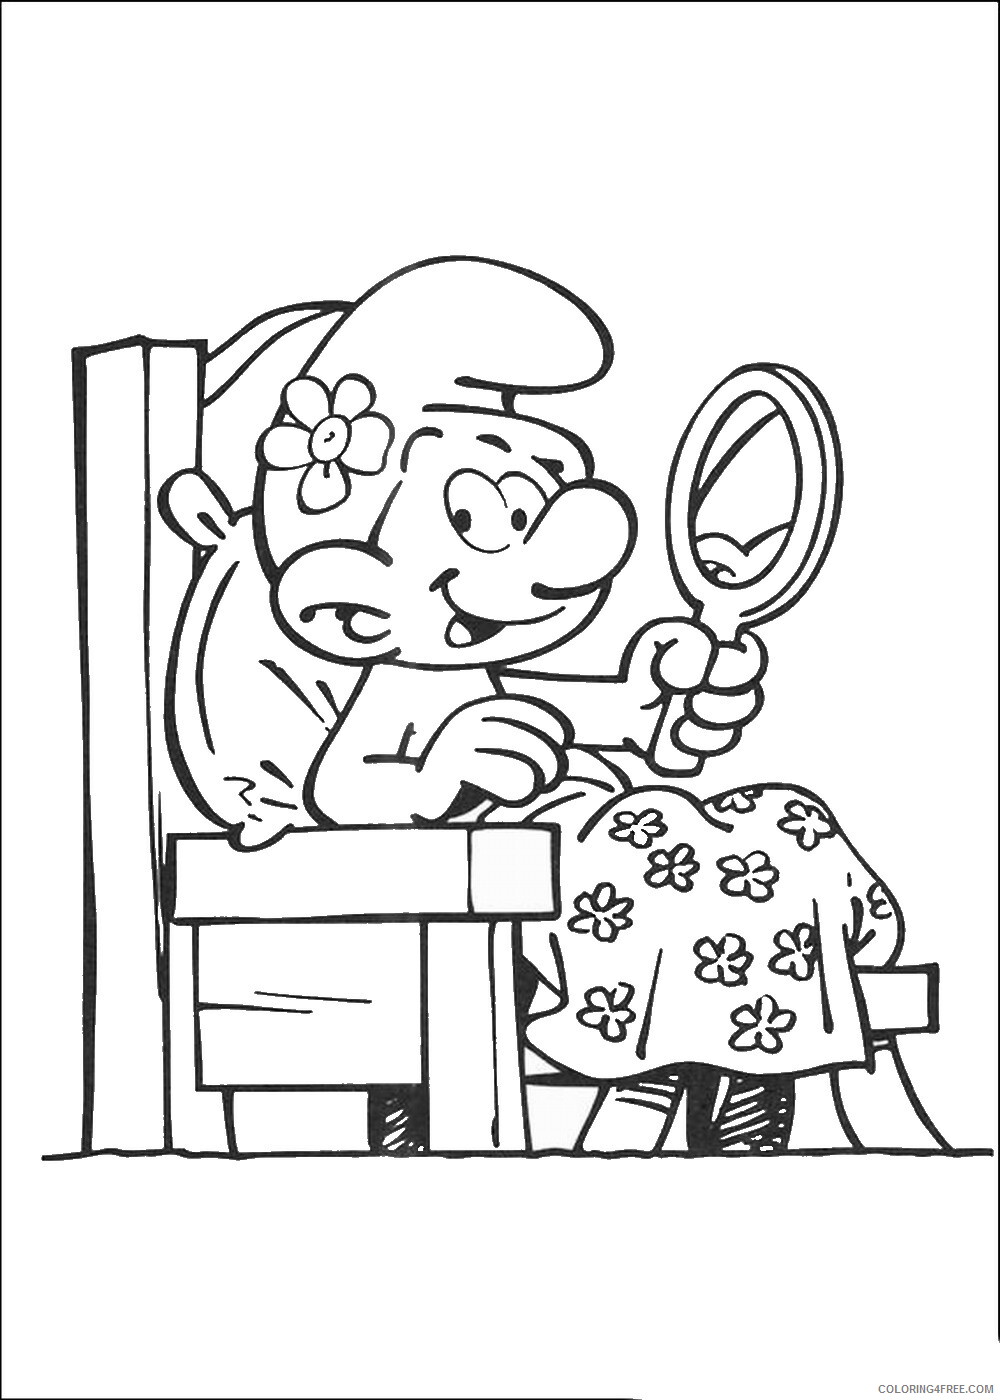 The Smurfs Coloring Pages TV Film smurfs_24 Printable 2020 09725 Coloring4free